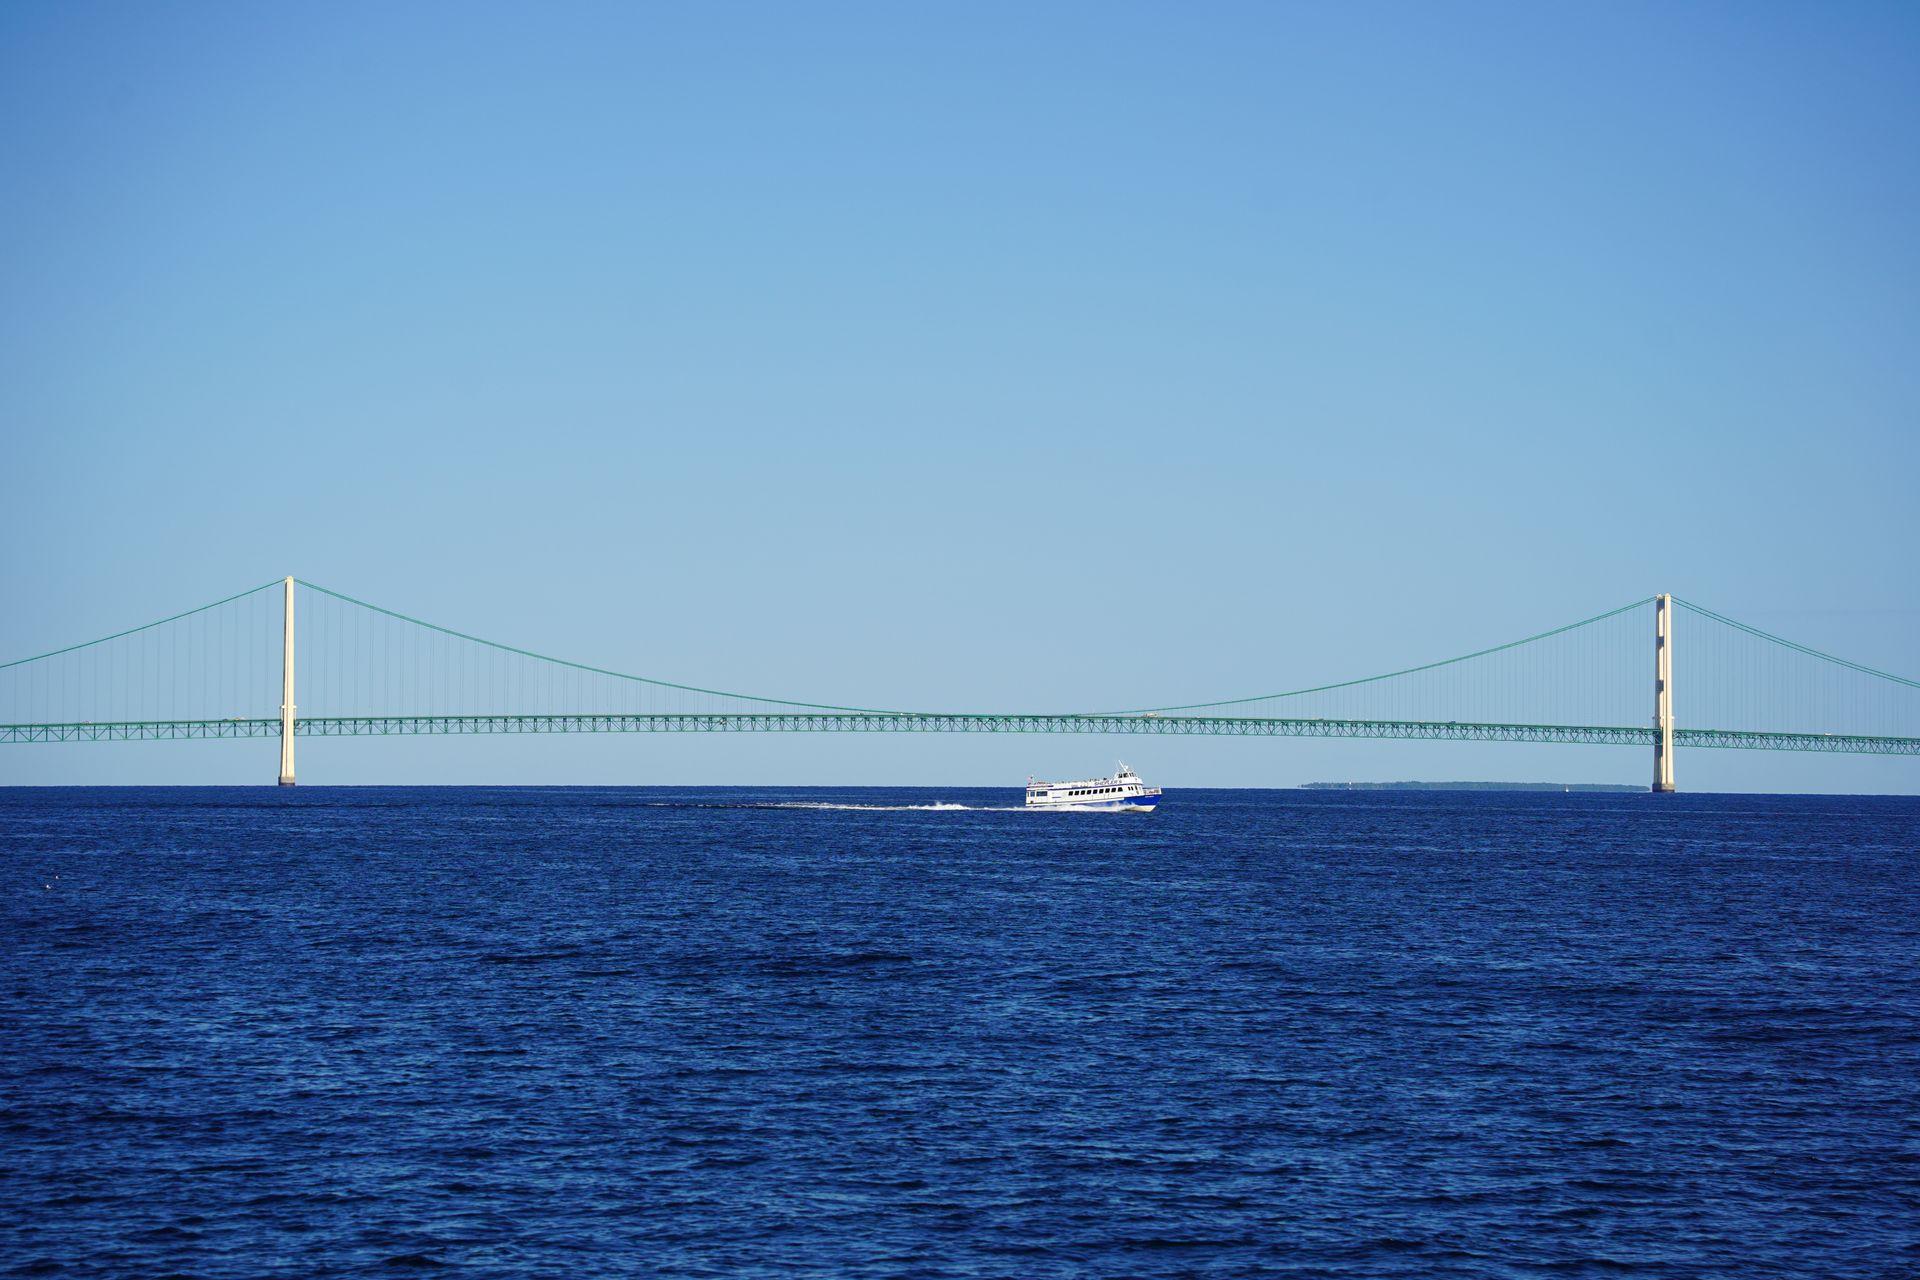 Looking in the distance at a ferry in front of Mackinac Bridge